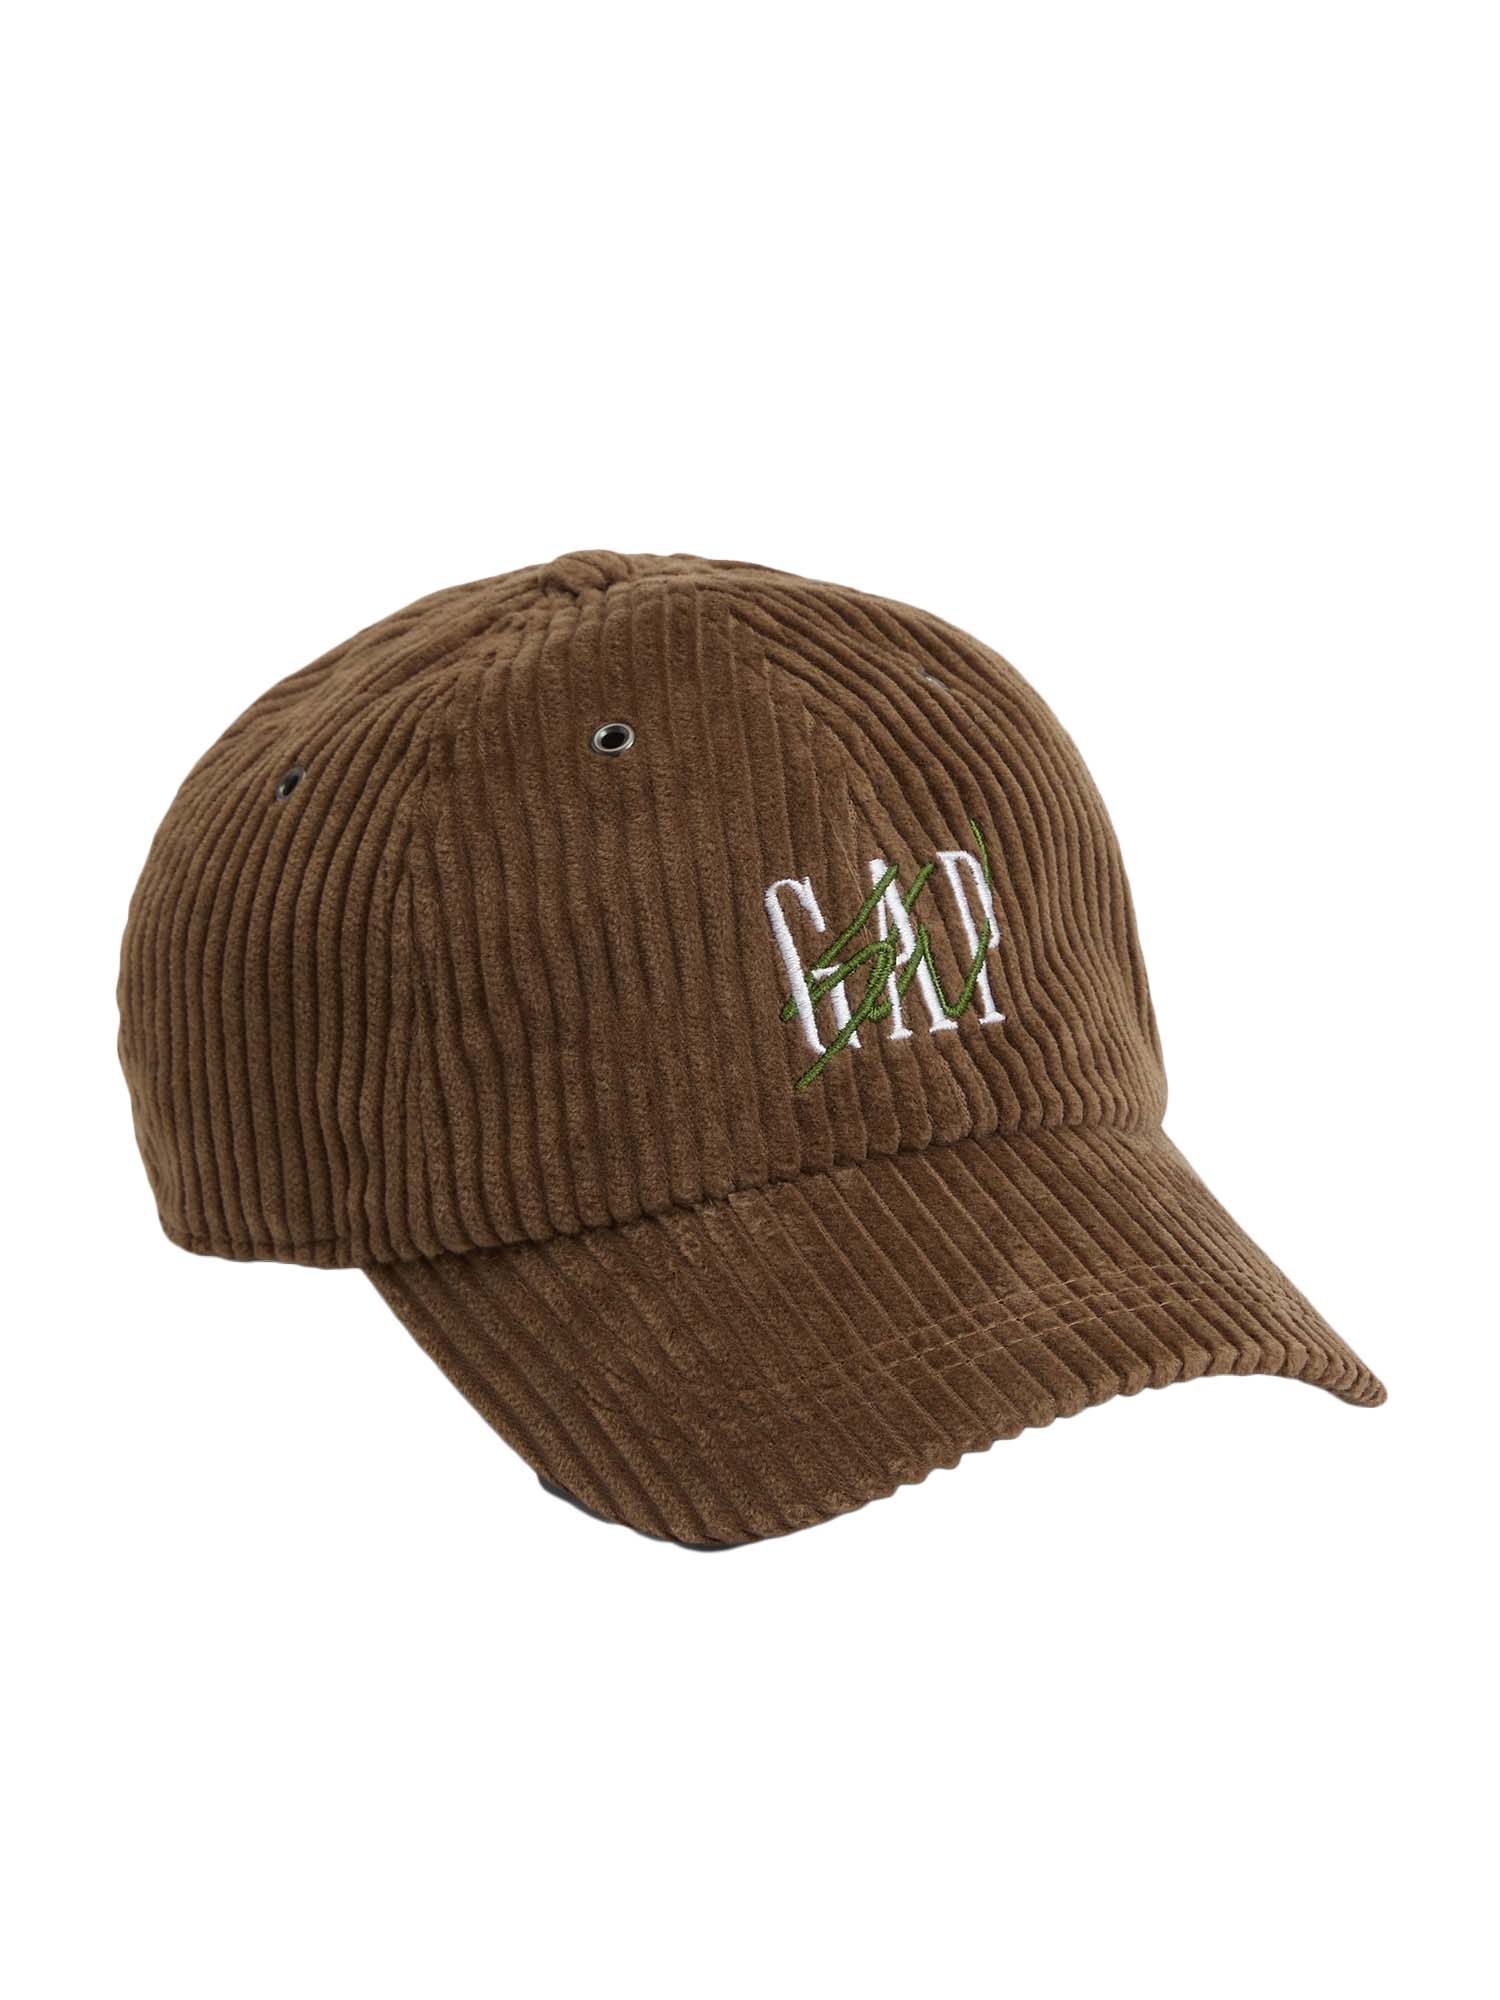 Gap Re-Issue × Sean Wotherspoon Corduroy Logo Baseball Hat Light Brown